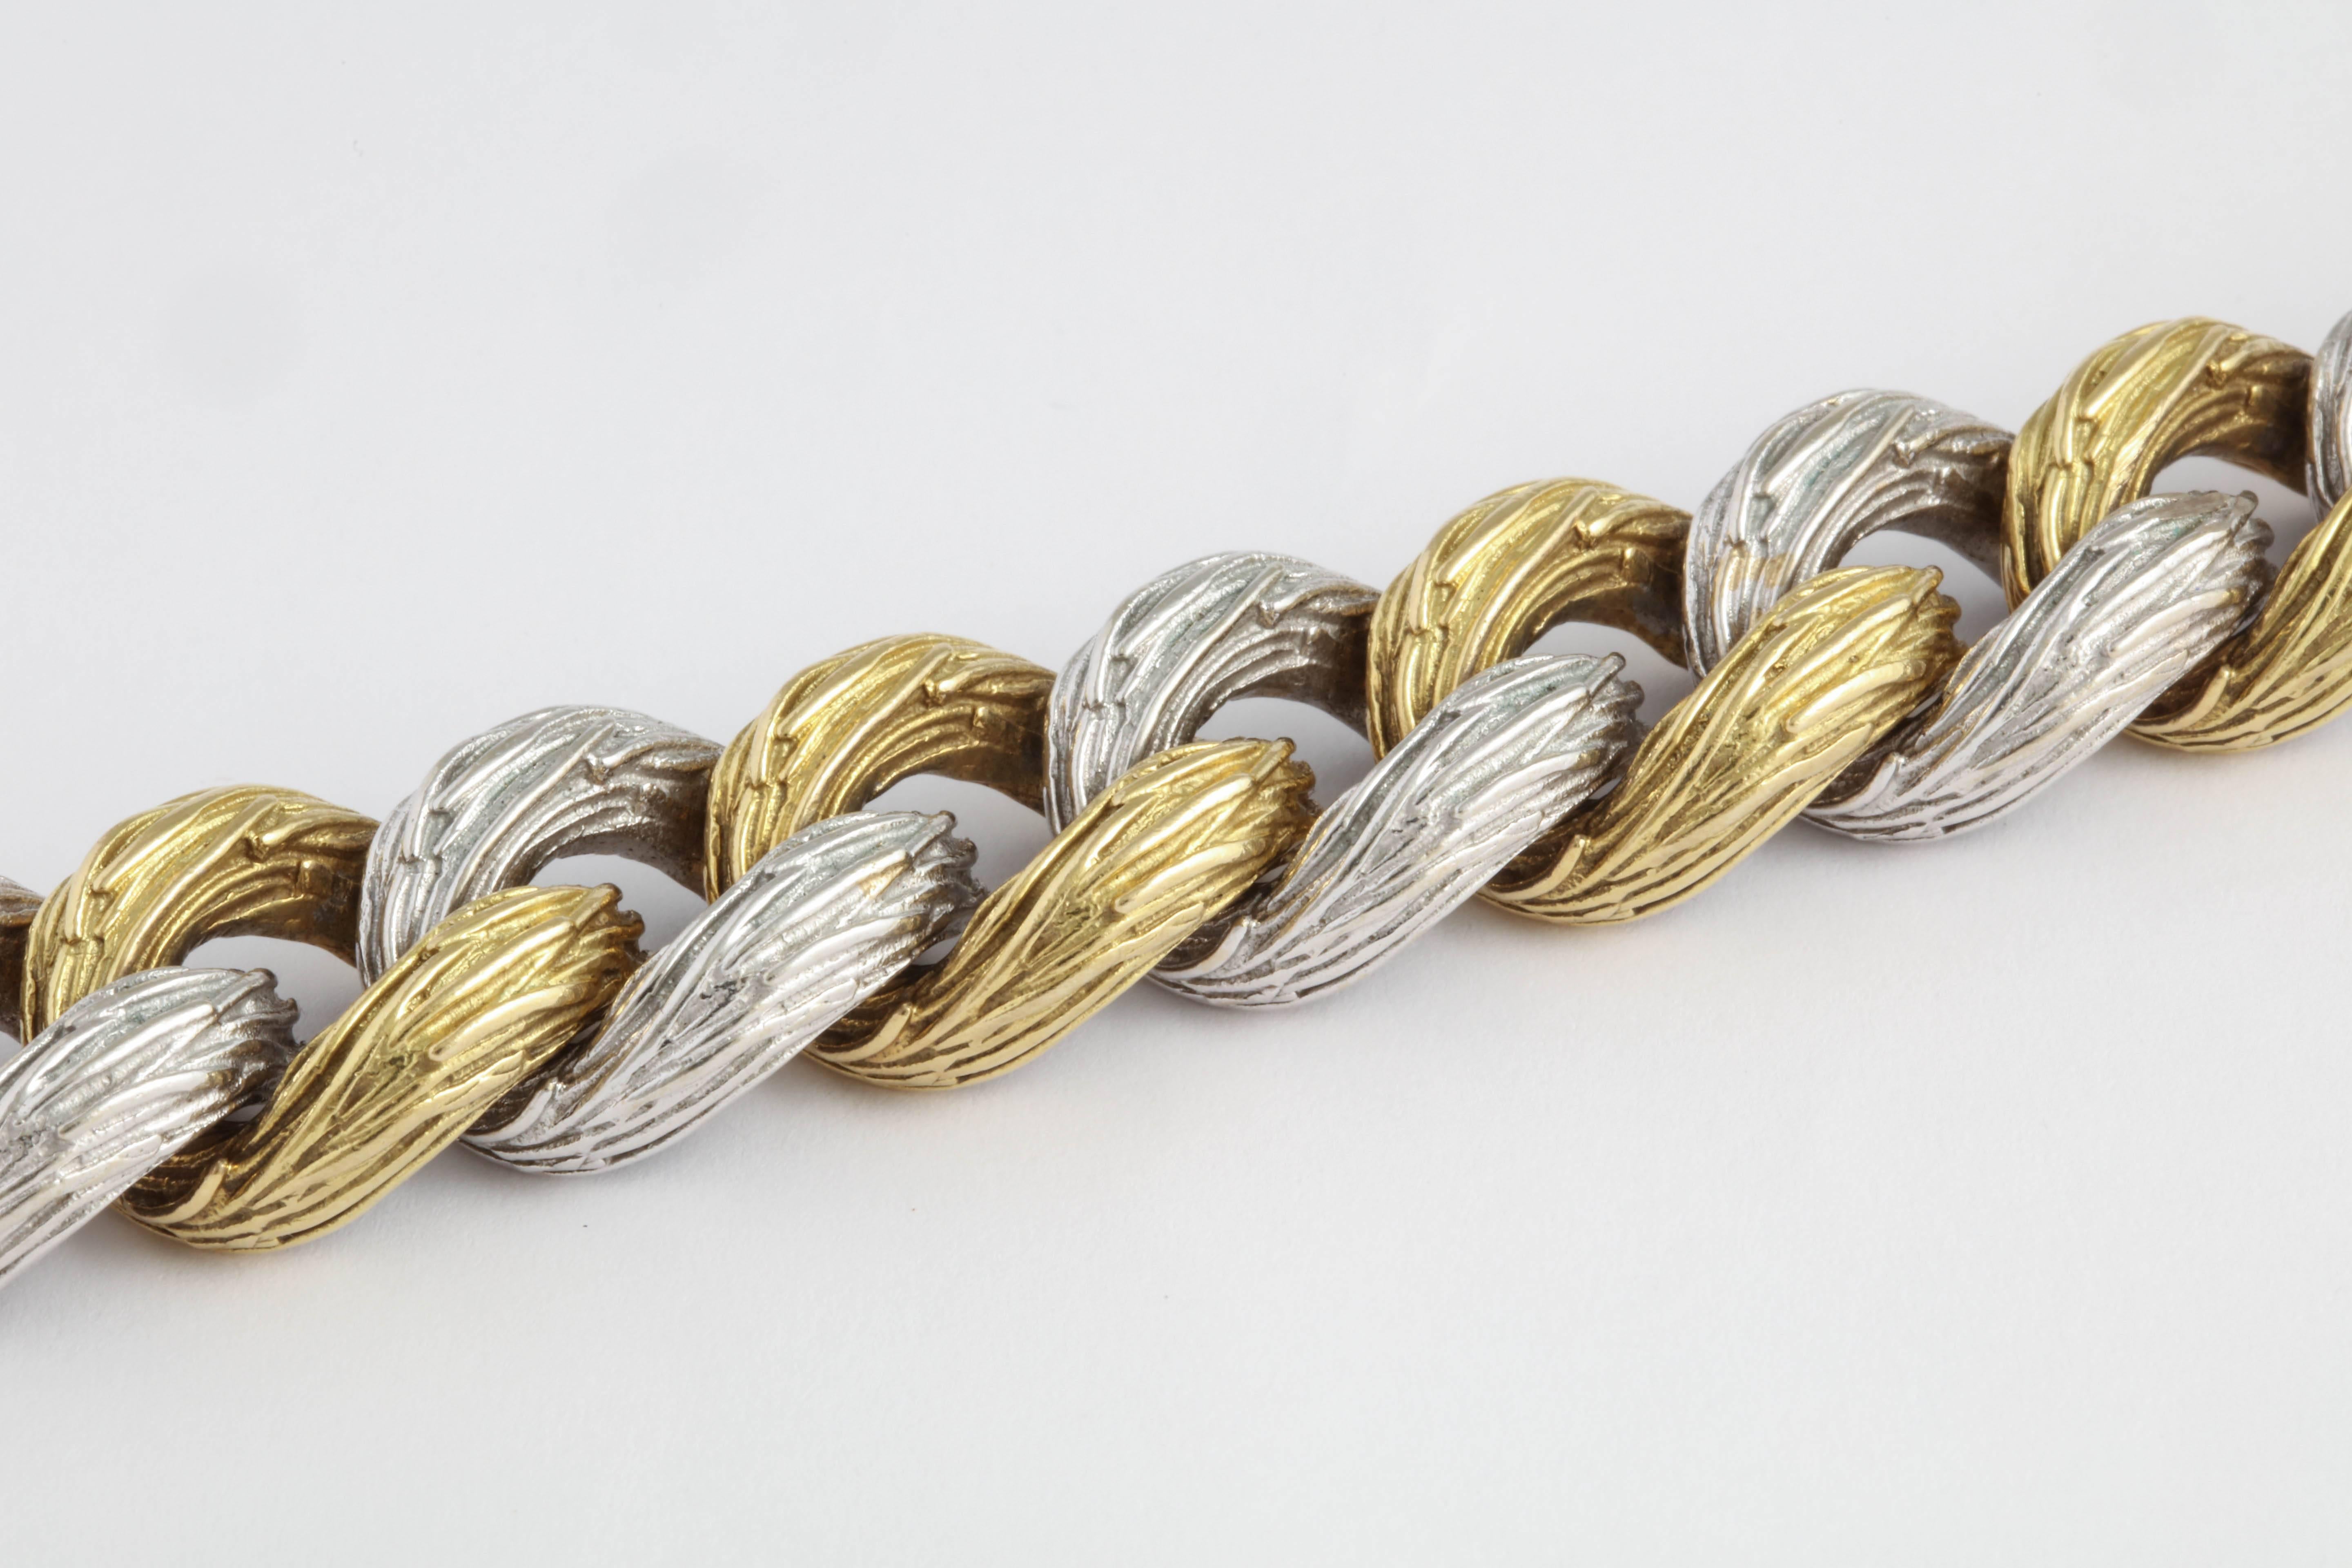 Contemporary Heavy Sculptural White and Yellow Gold Oval Link Bracelet